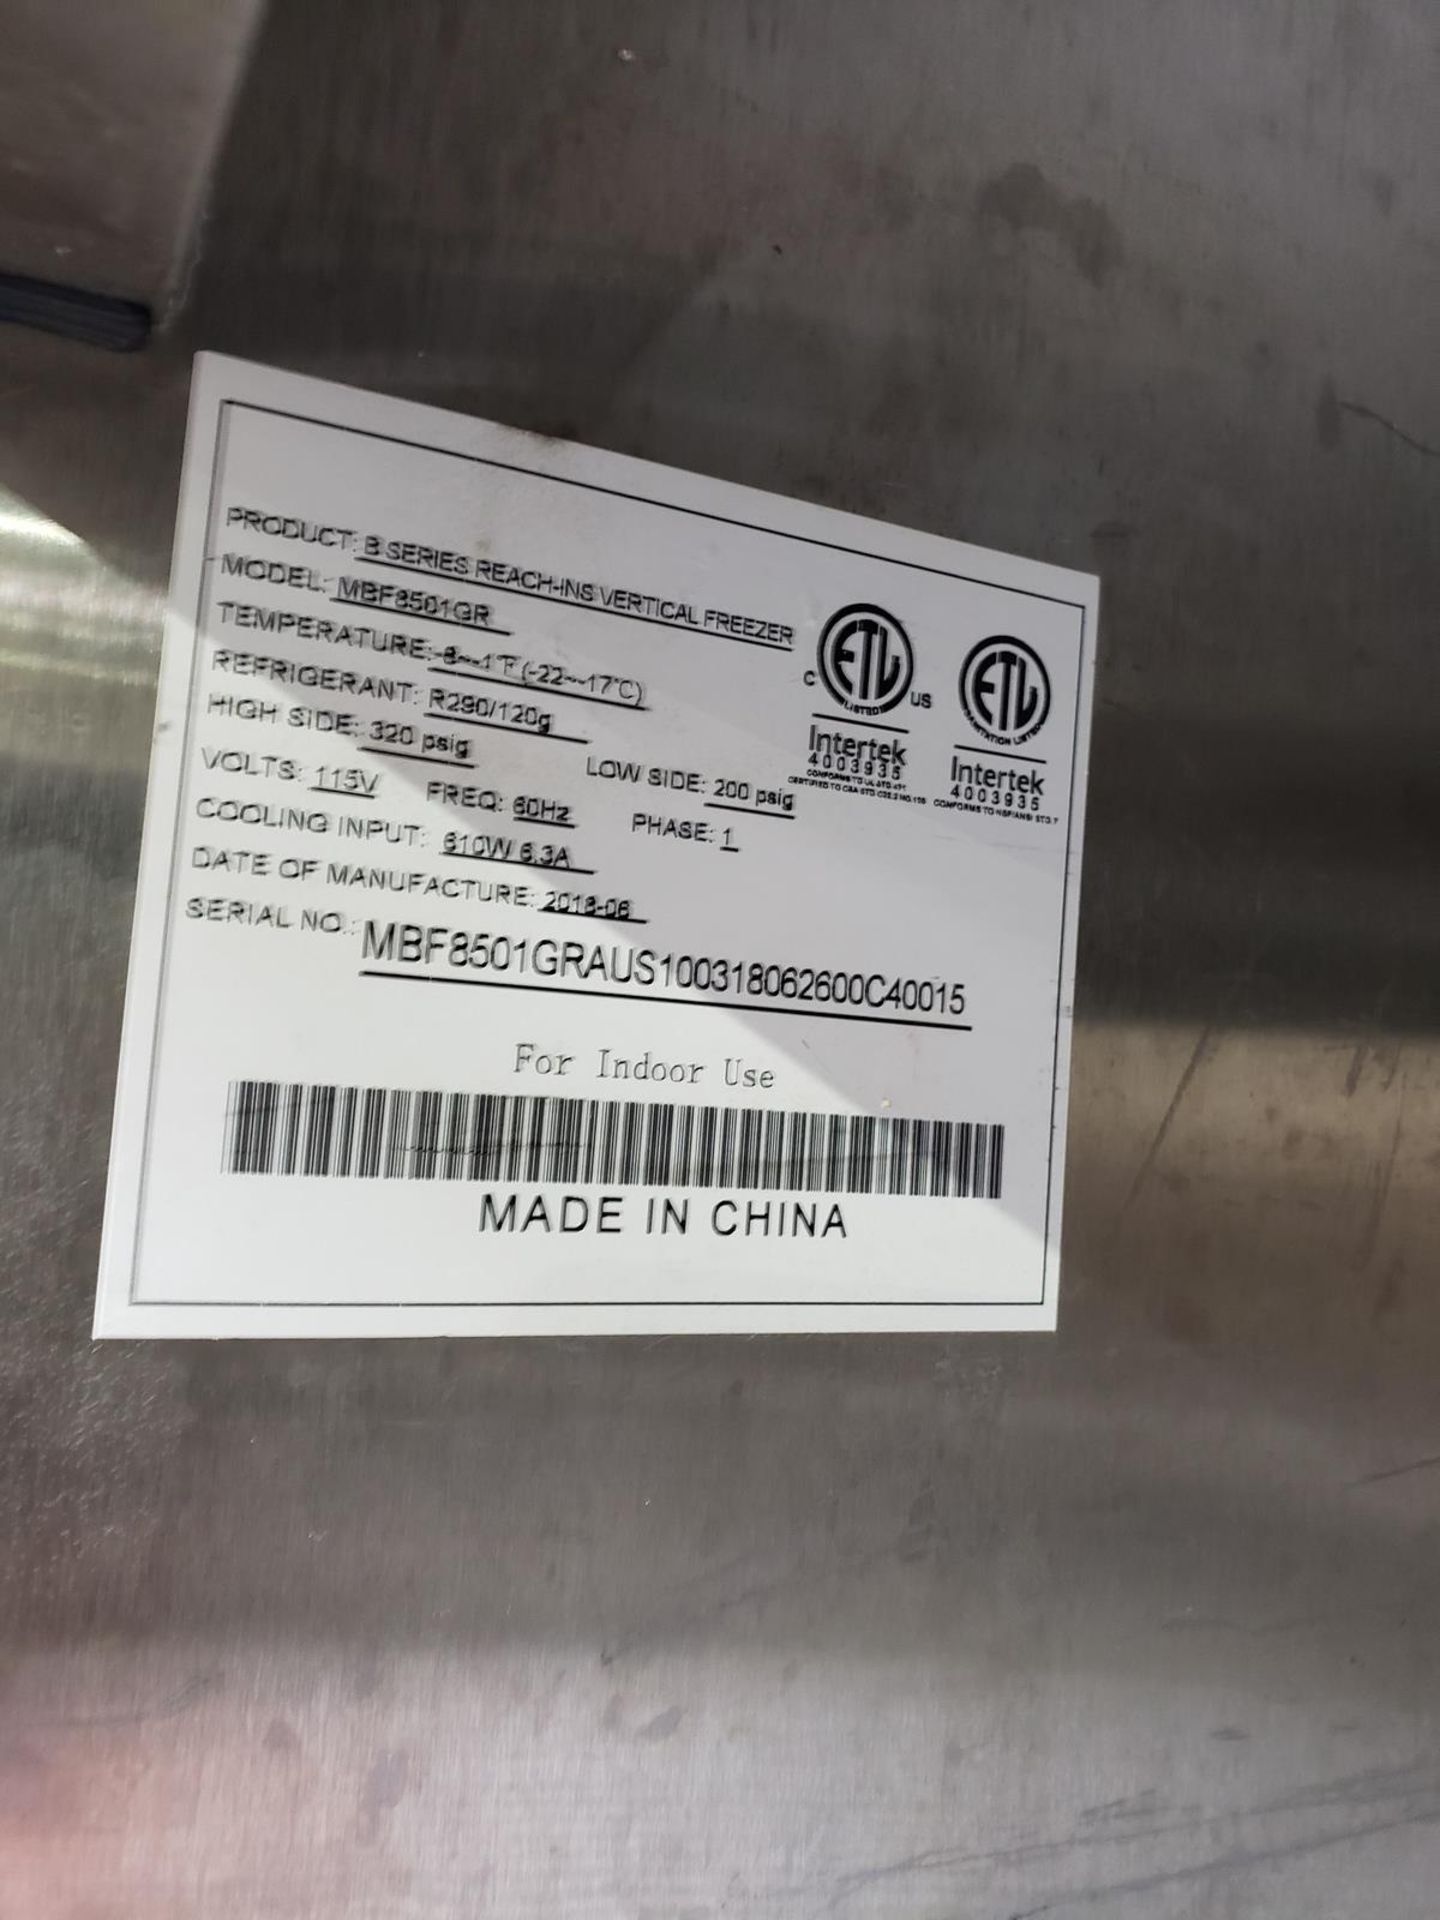 Atosa Stainless Steel Vertical Freezer, M# MBF8501C3R, S/N MBF8501GRAUS100318062600 | Rig Fee: $75 - Image 2 of 3